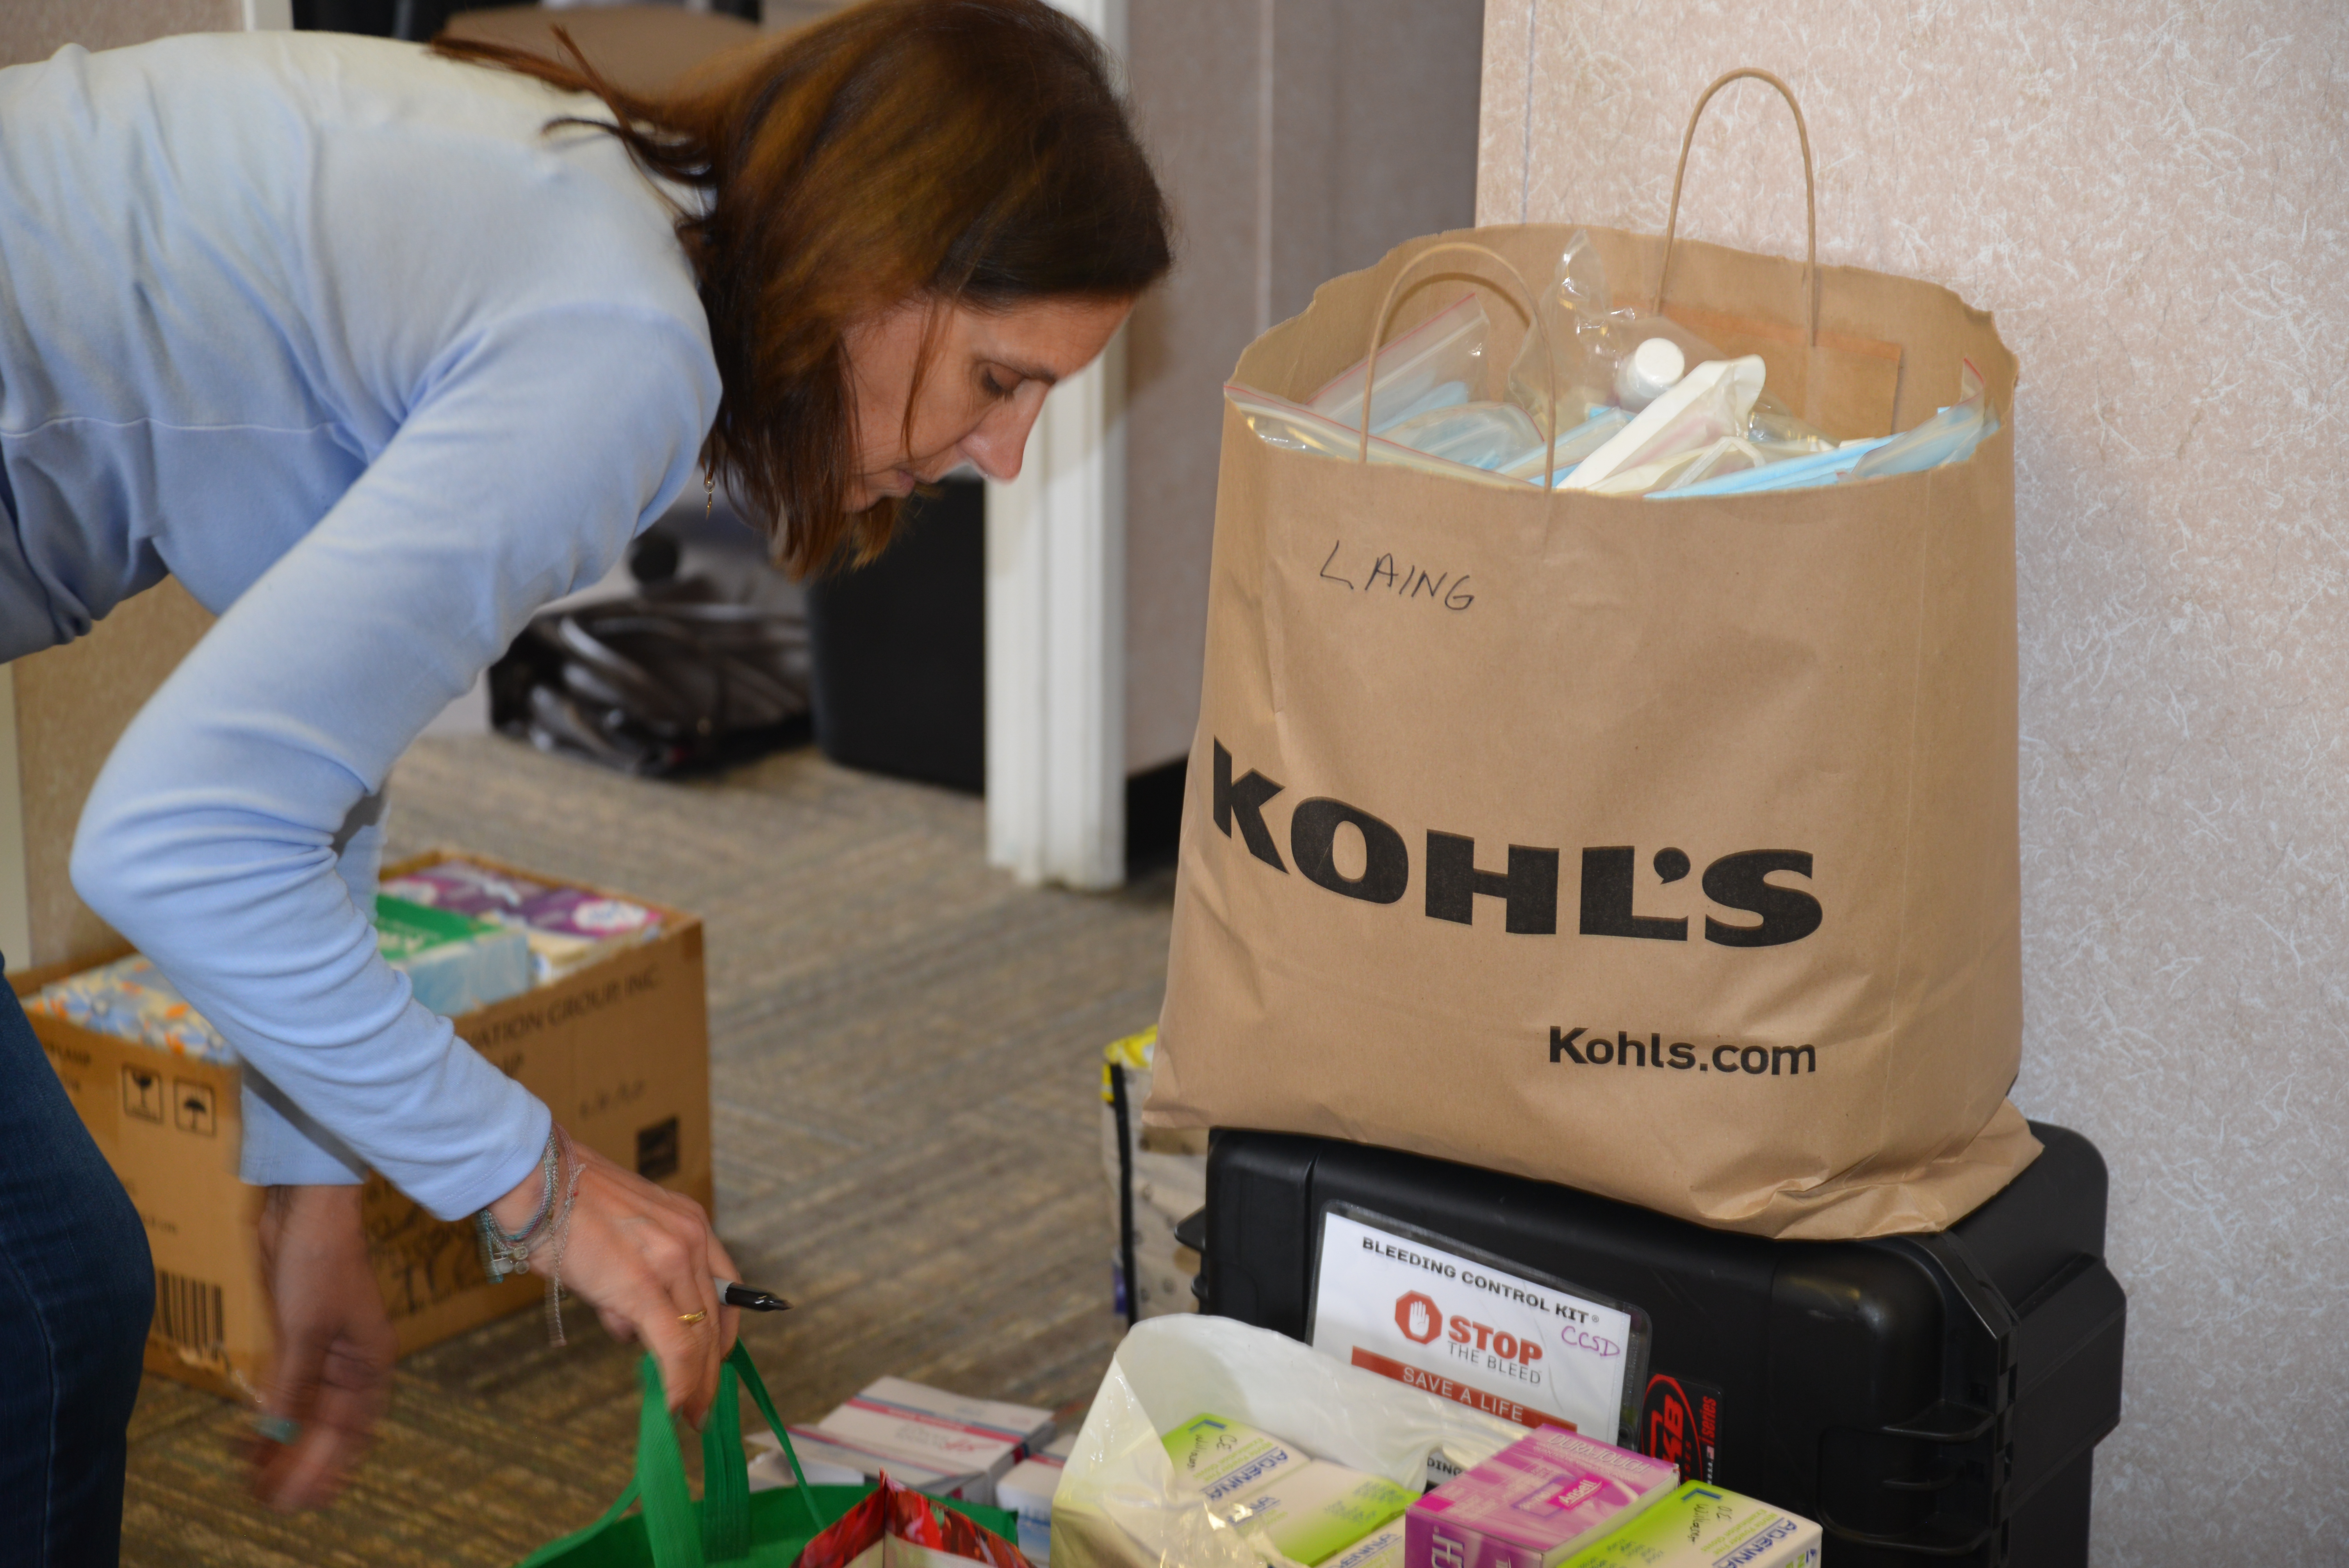 Charleston County school nurses collecting medical supplies for